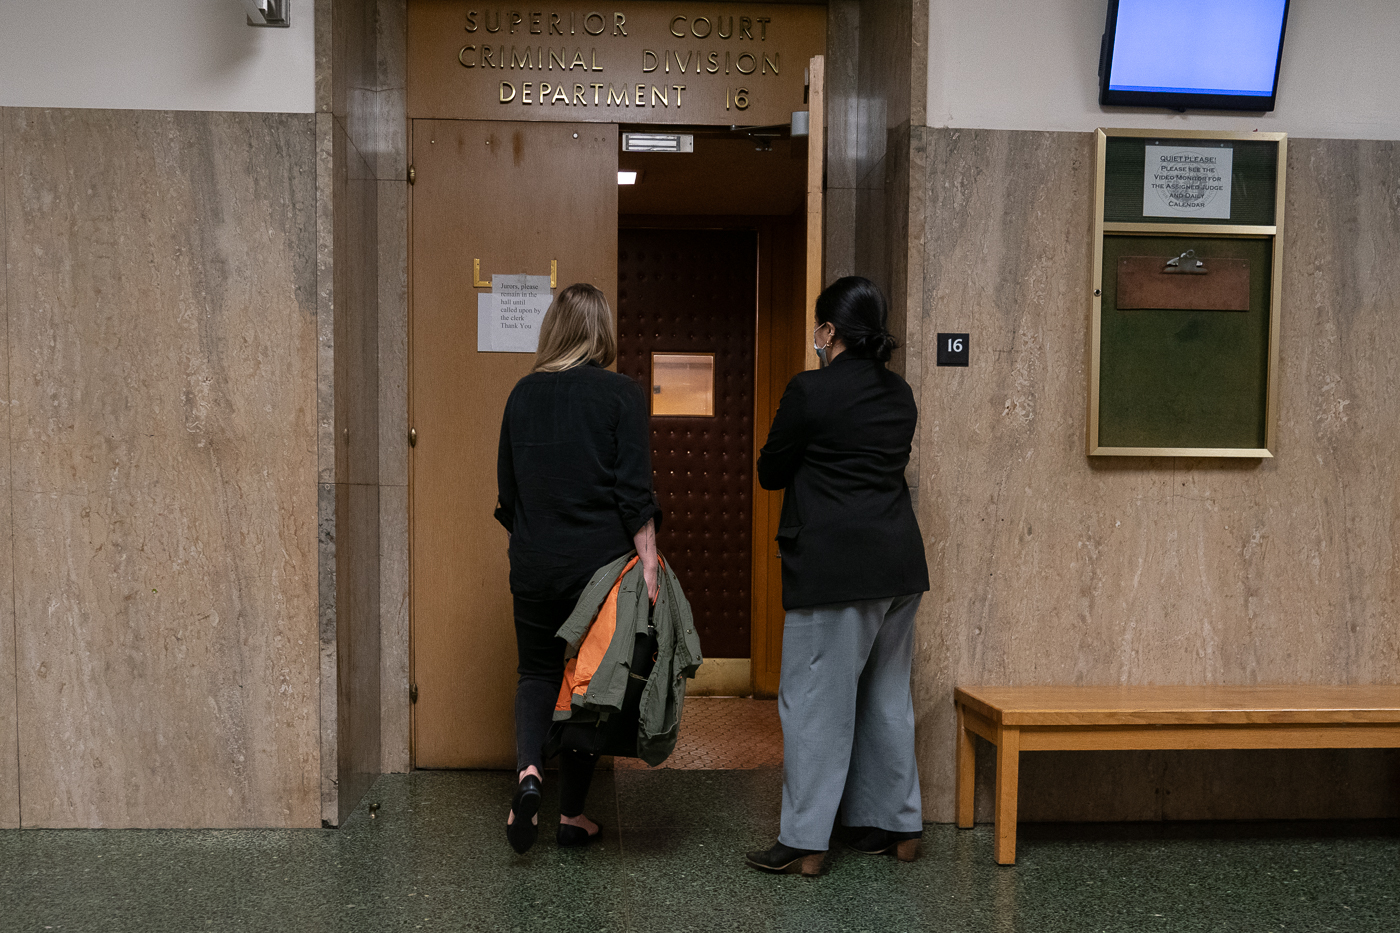 Key witness Kristin Onorato enters a courtoom at the Hall of Justice.